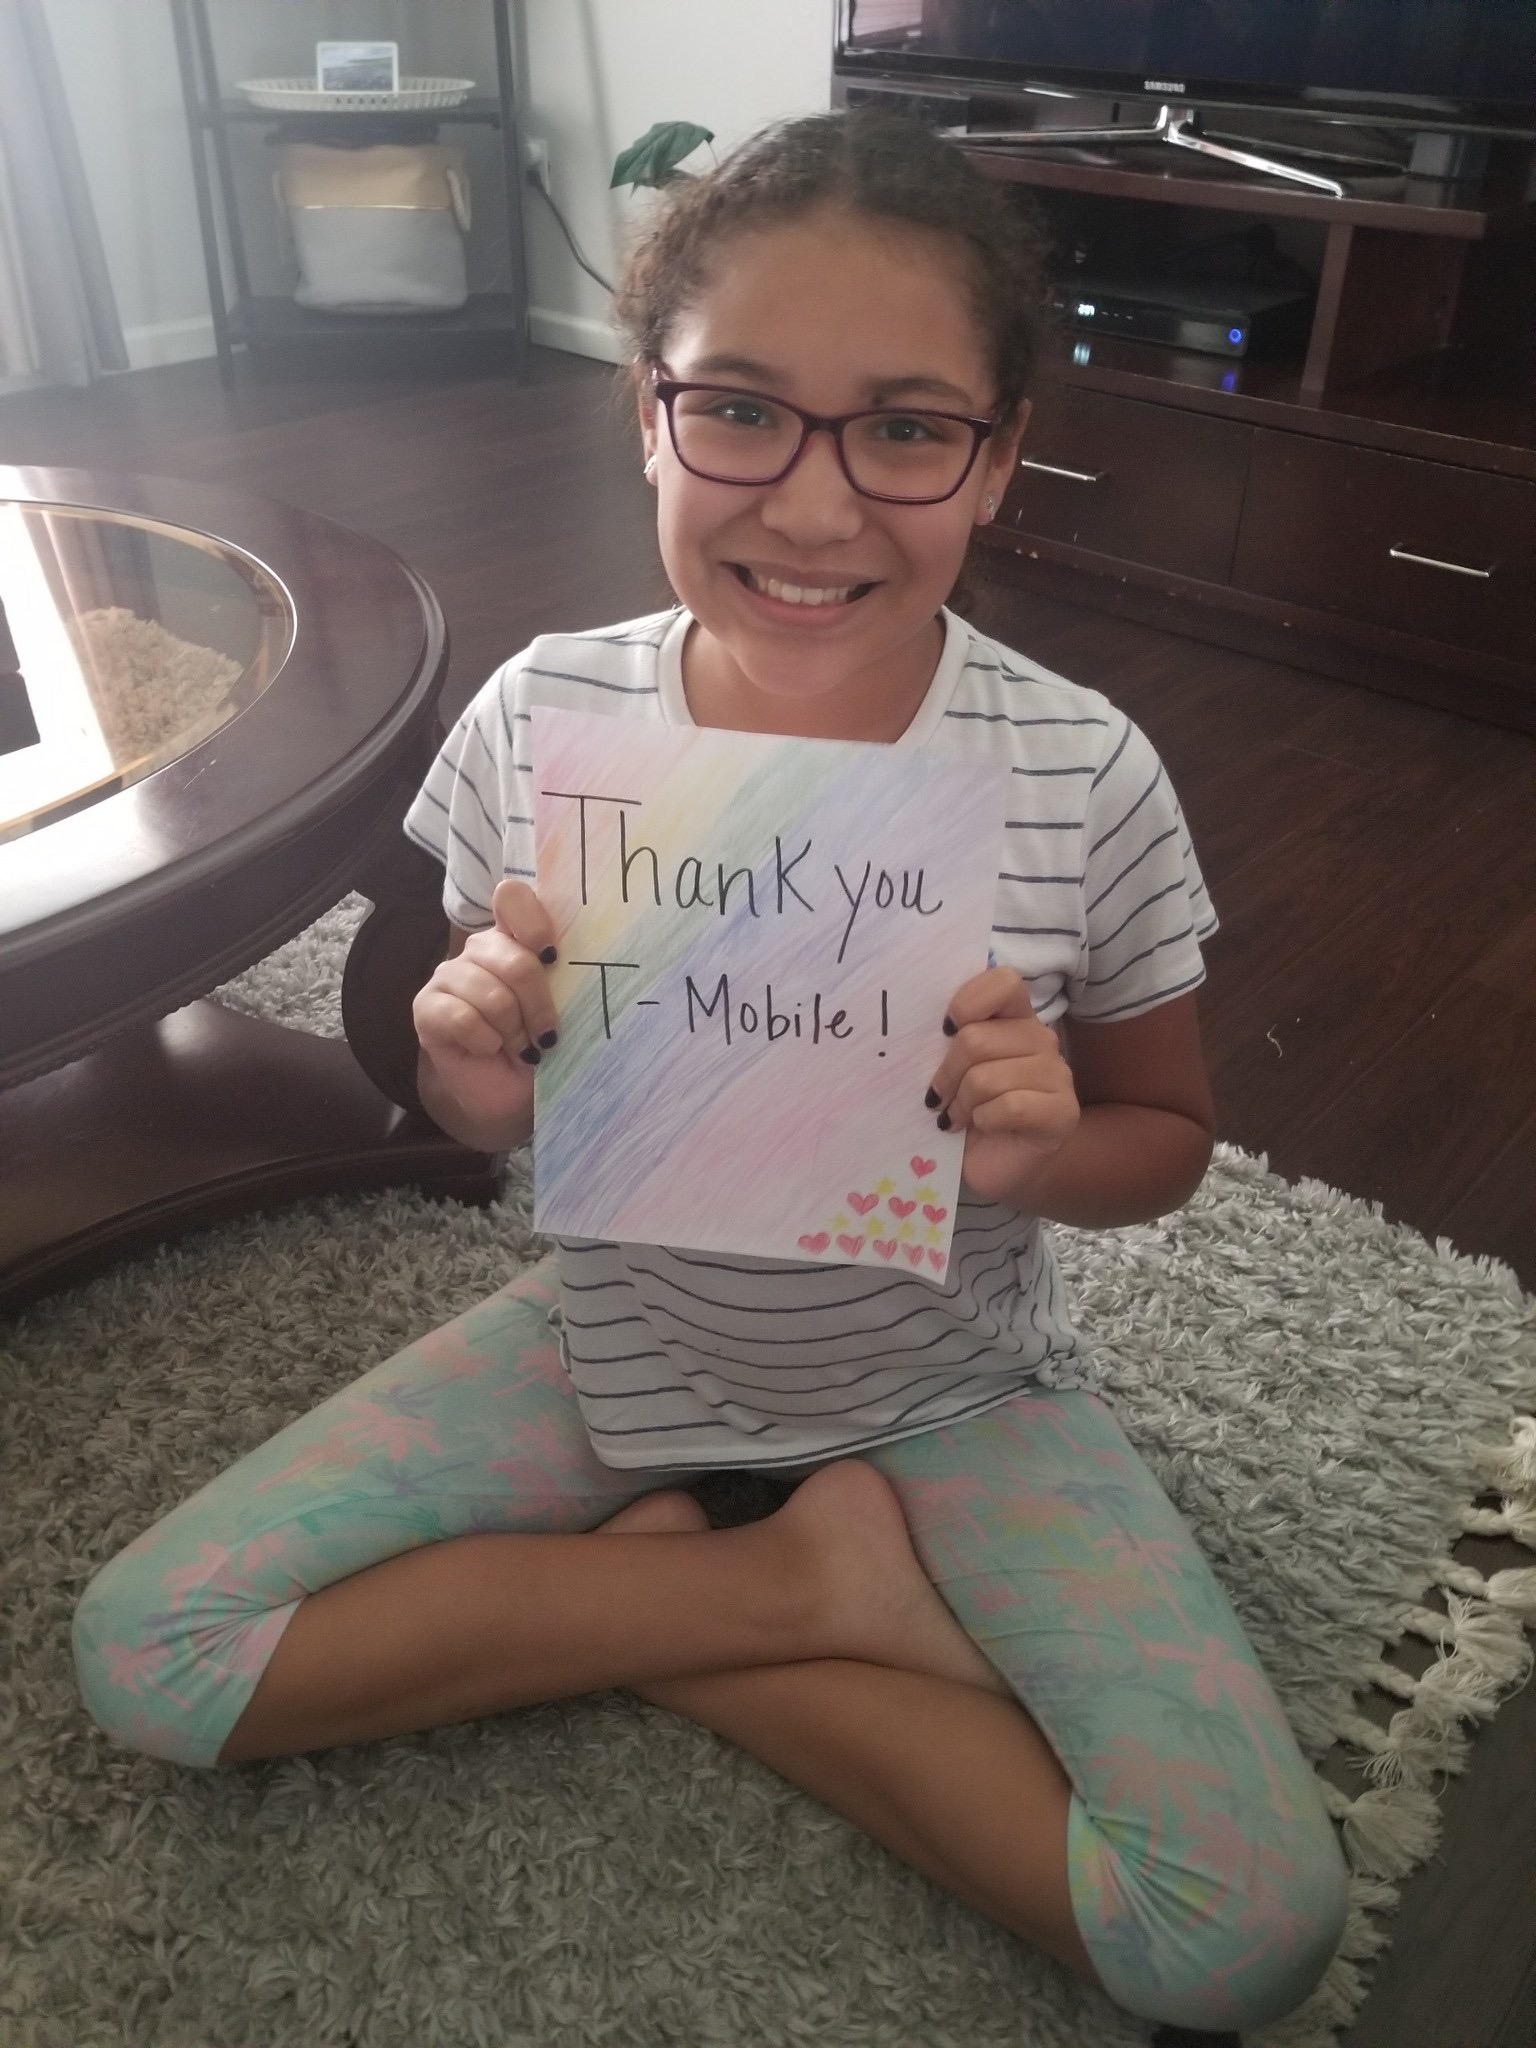 Student holds sign to thank T-Mobile